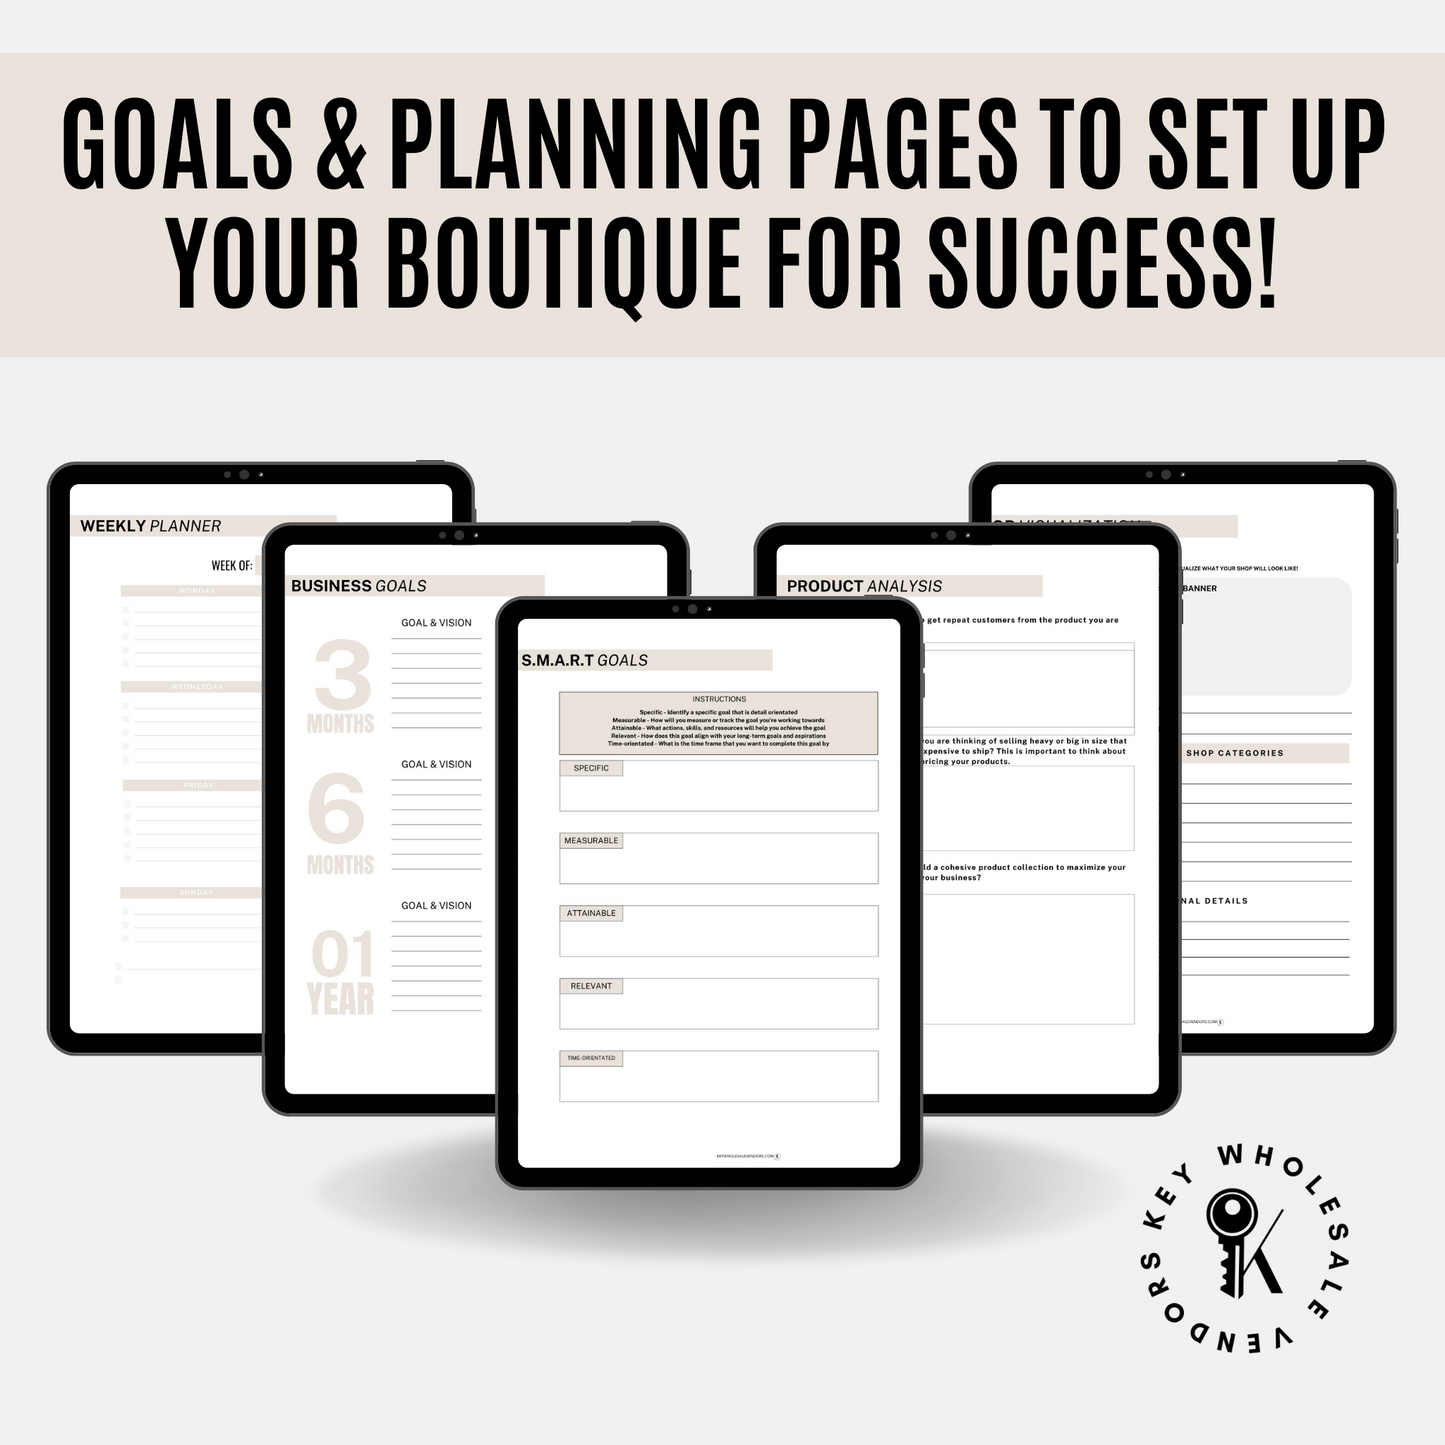 Goal setting pages